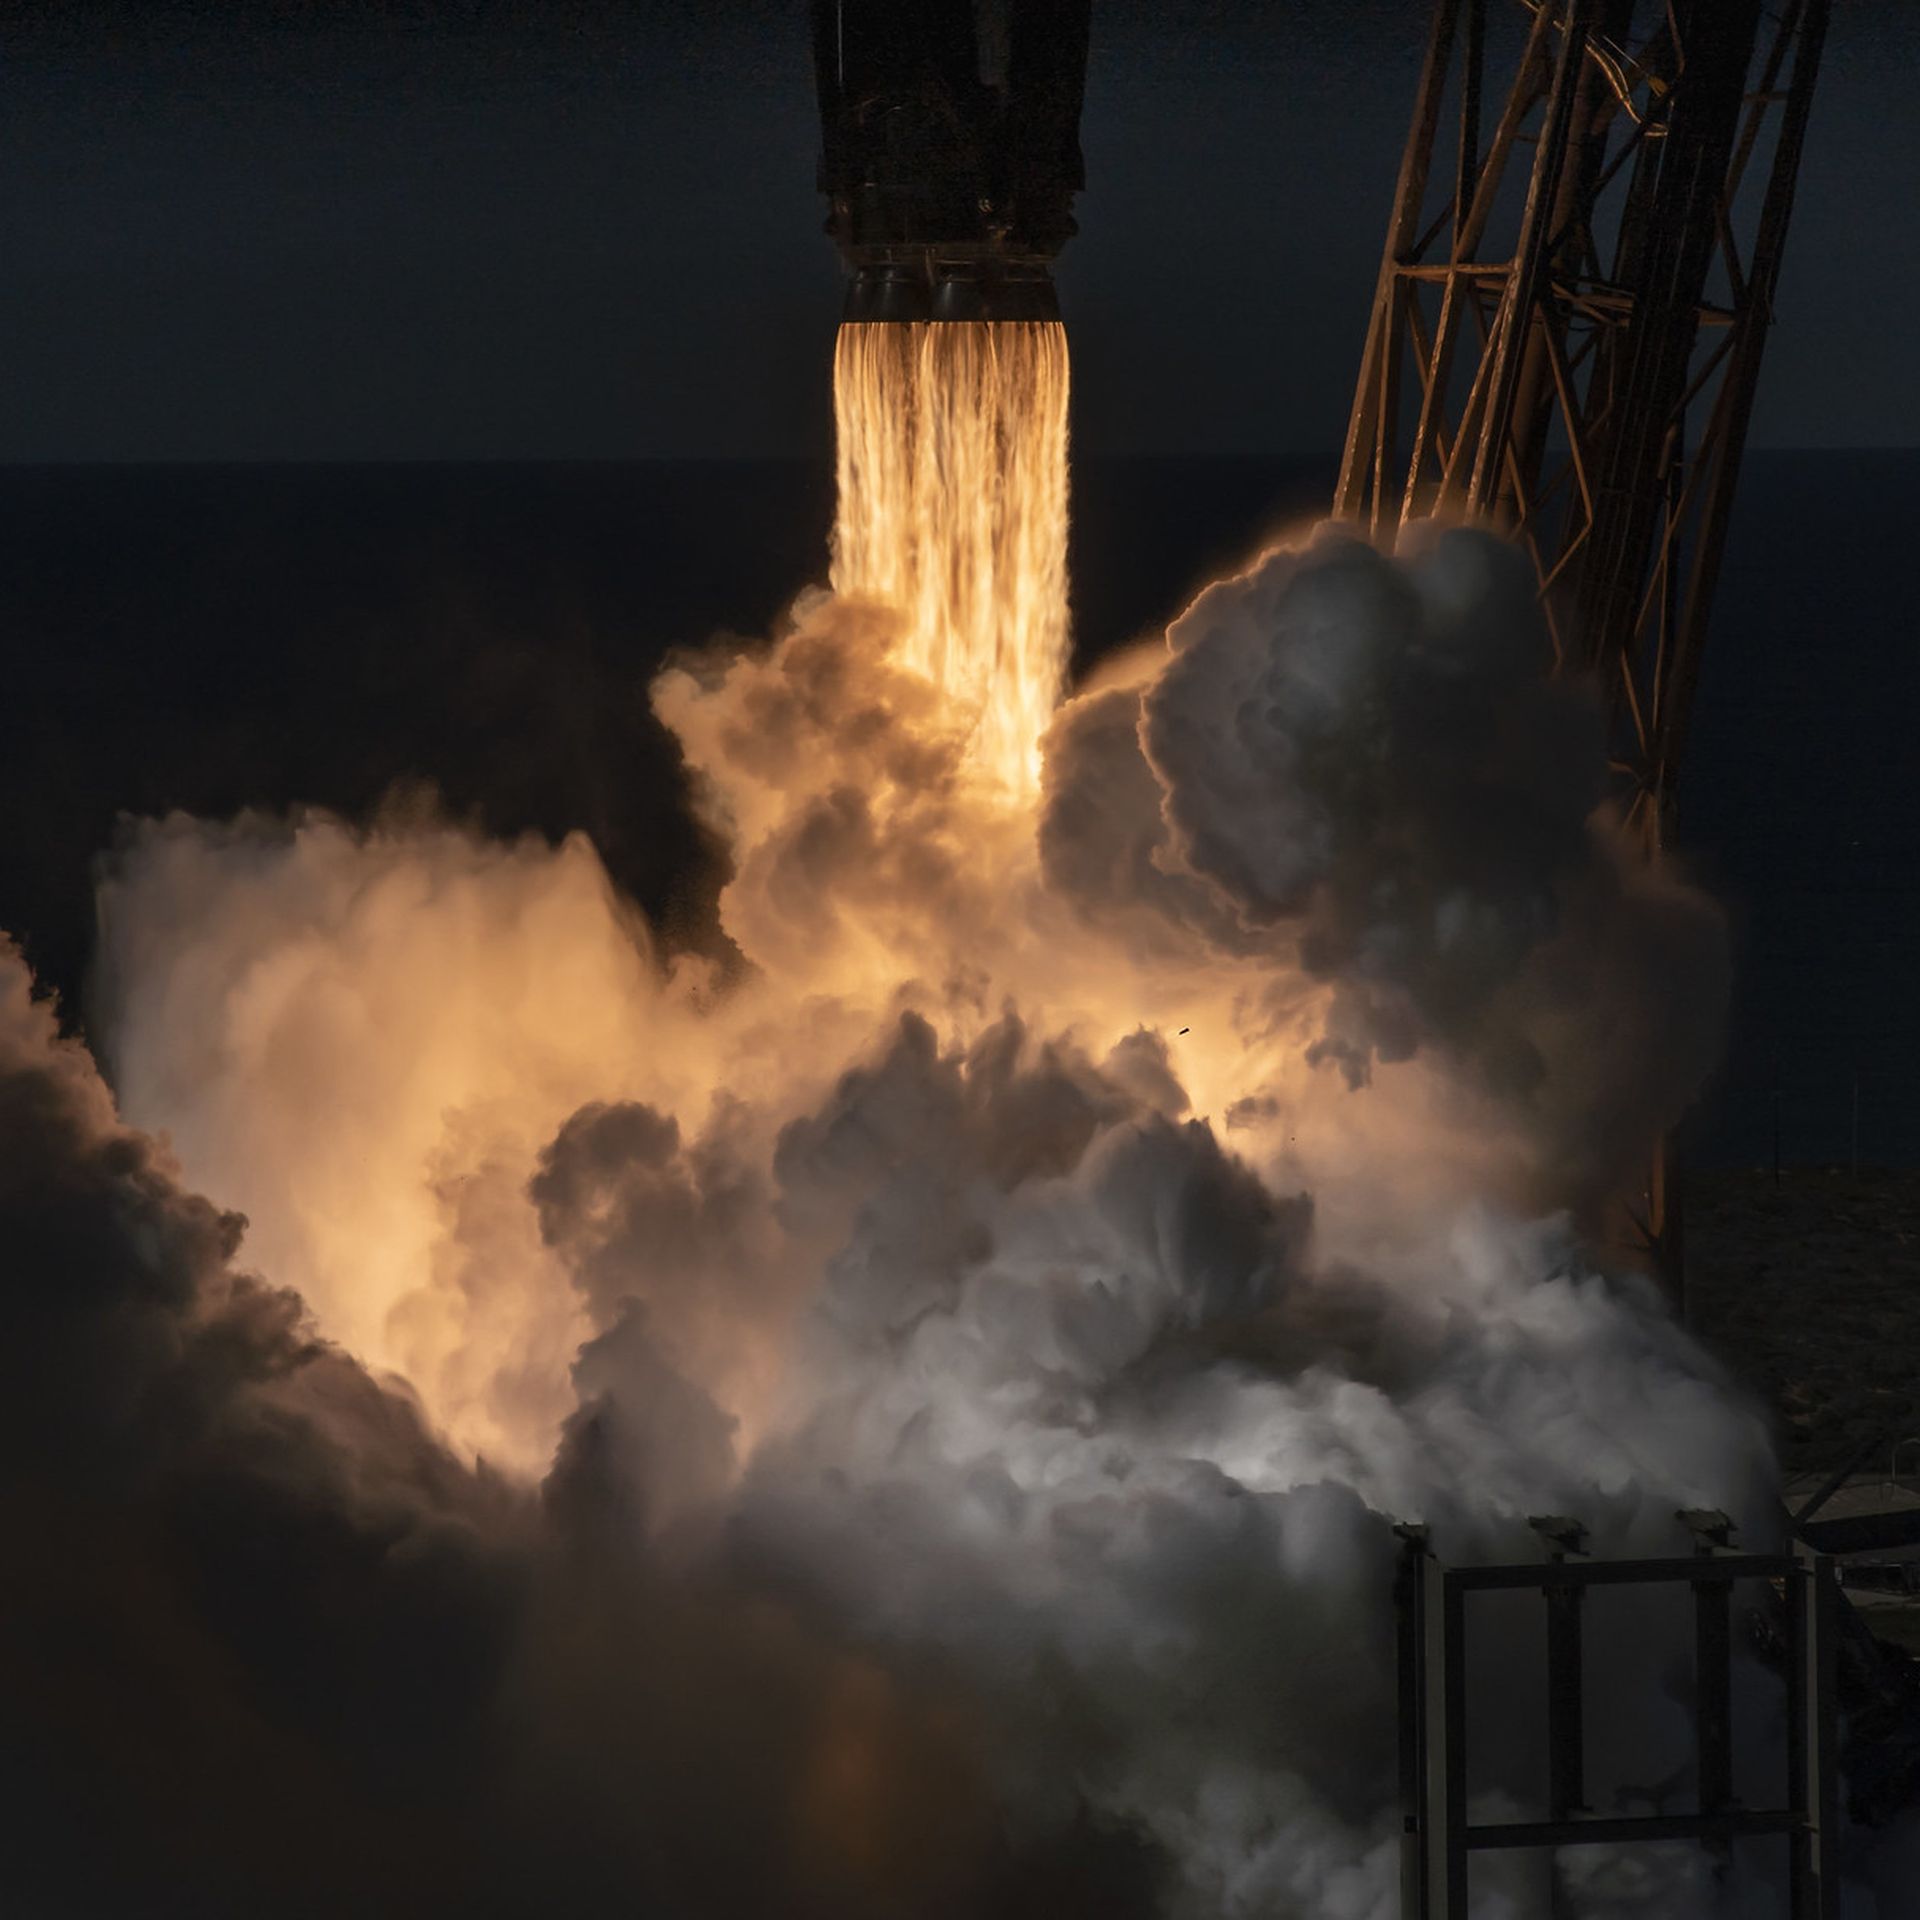 A close-up of a rocket launching to space